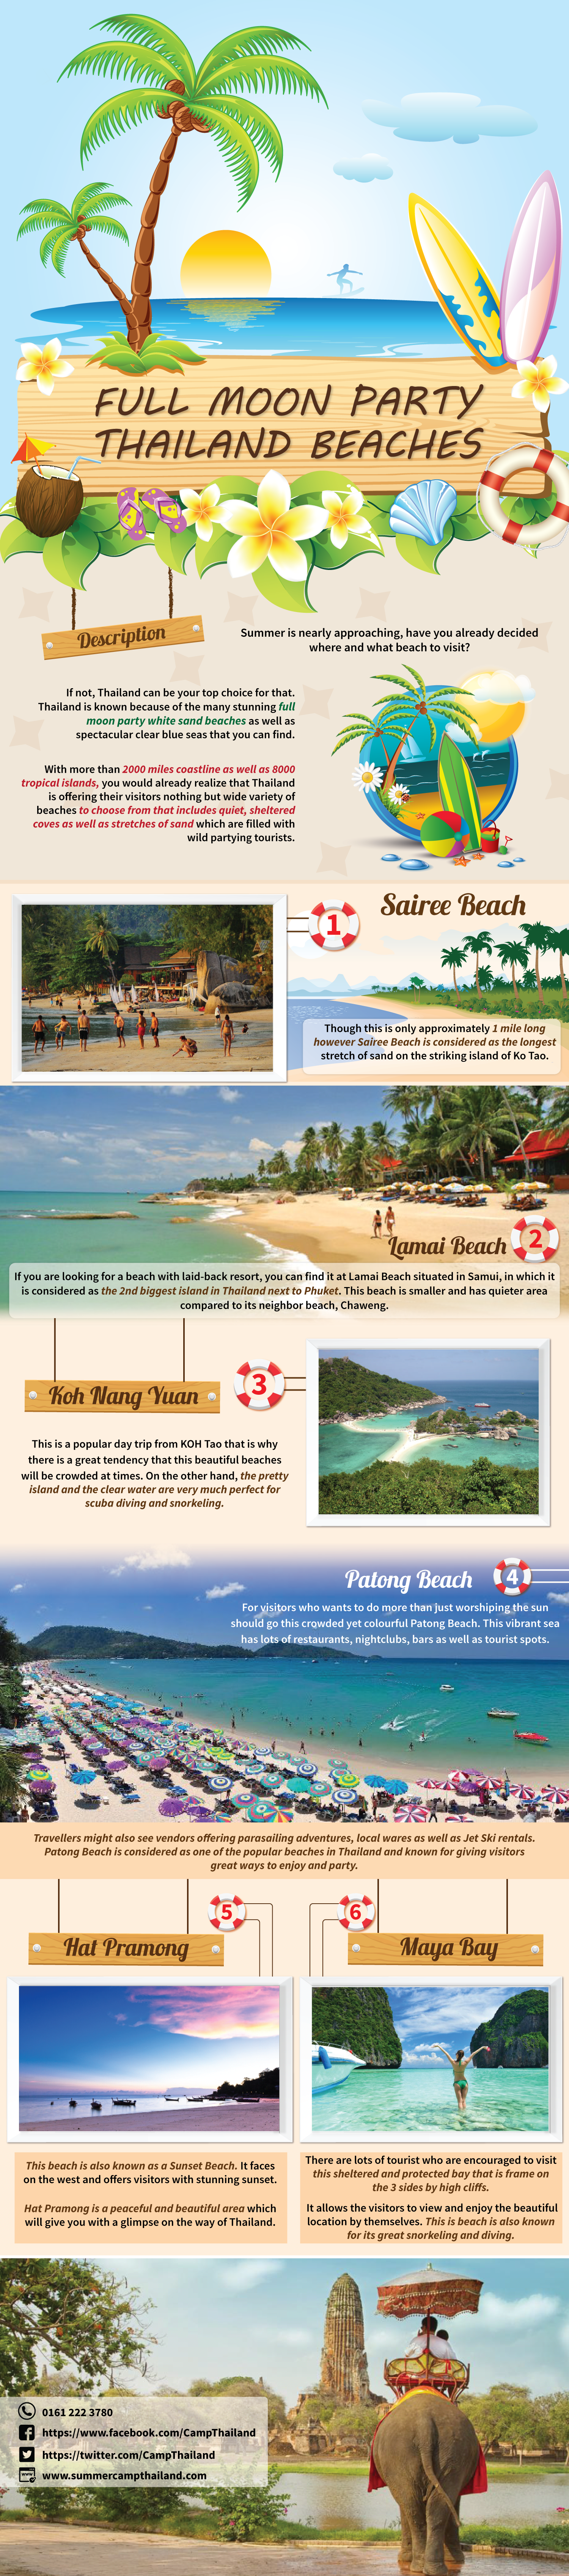 Full Moon Party-Summer Camp Thailand Infographic